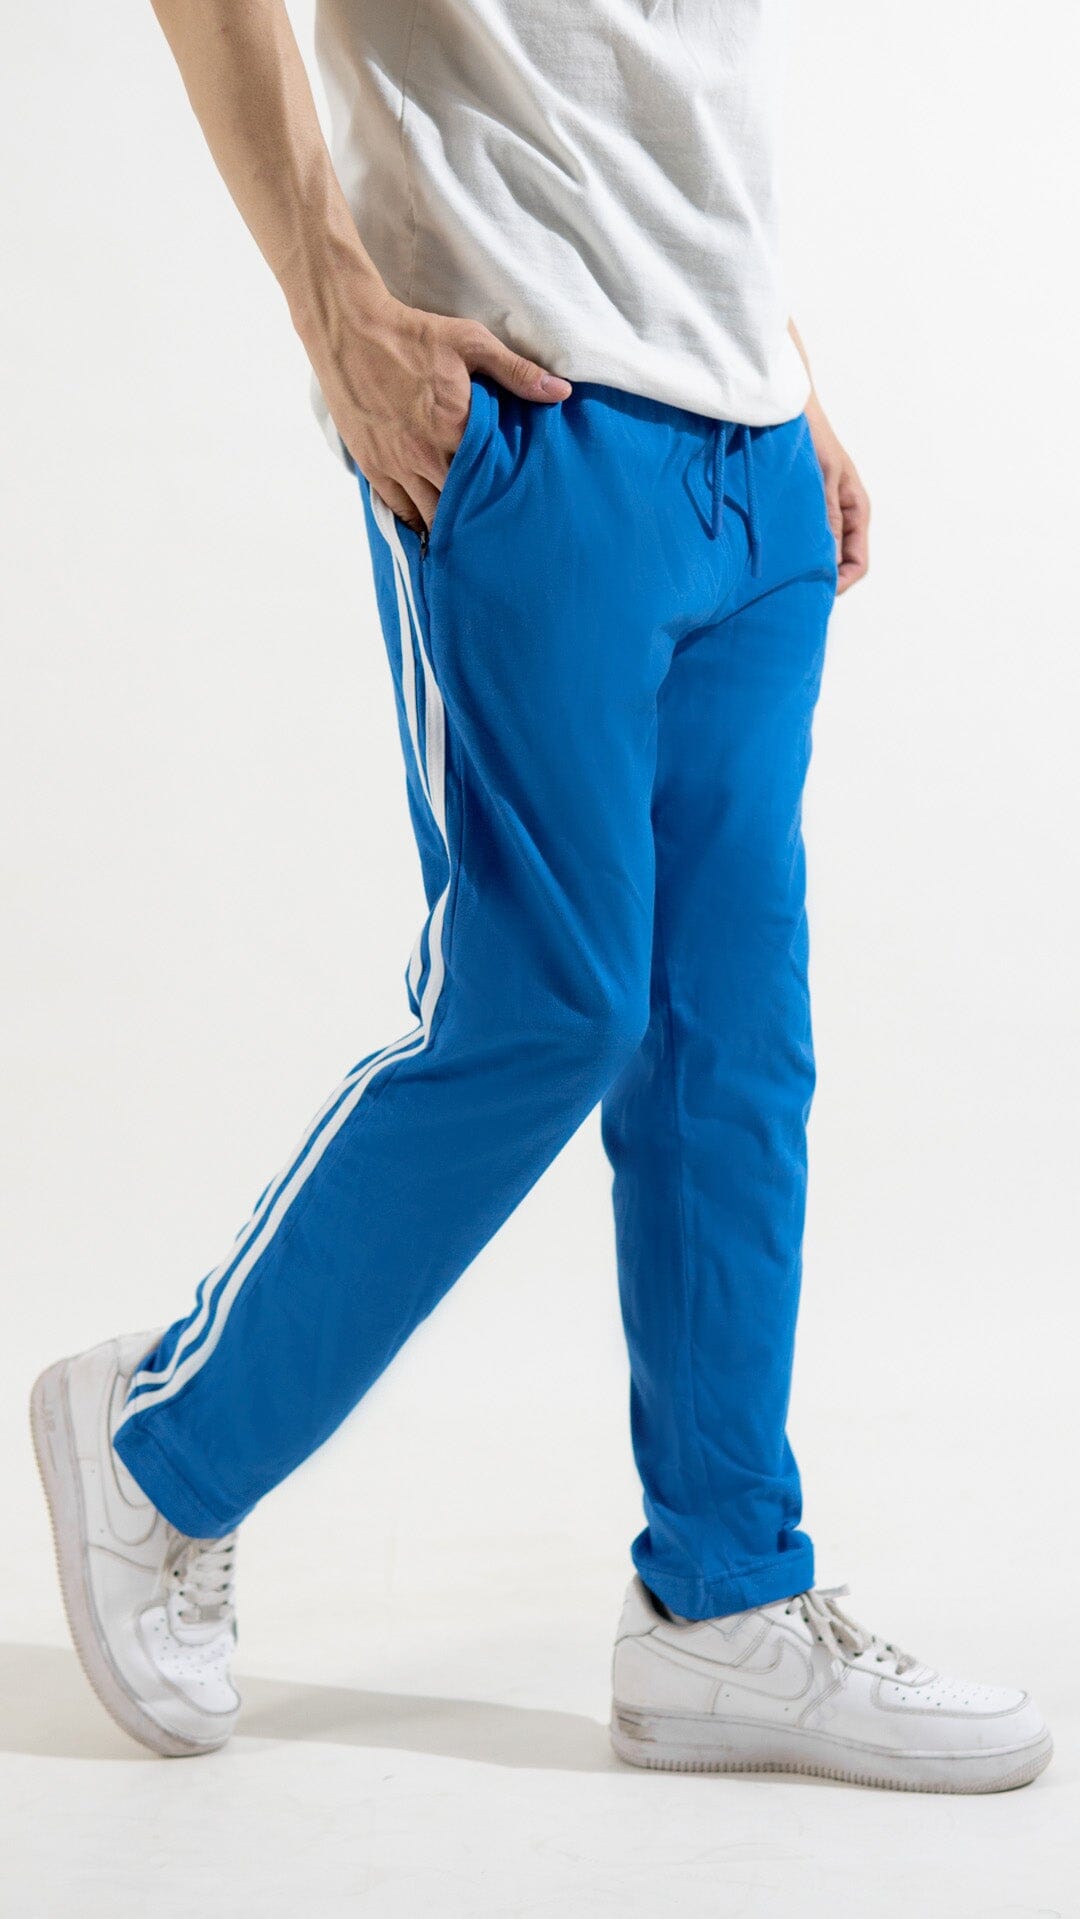 Heavy Cotton Jersey Slim-Fit Lounge Pants with Sporty Side Stripes Turquoise Blue S 